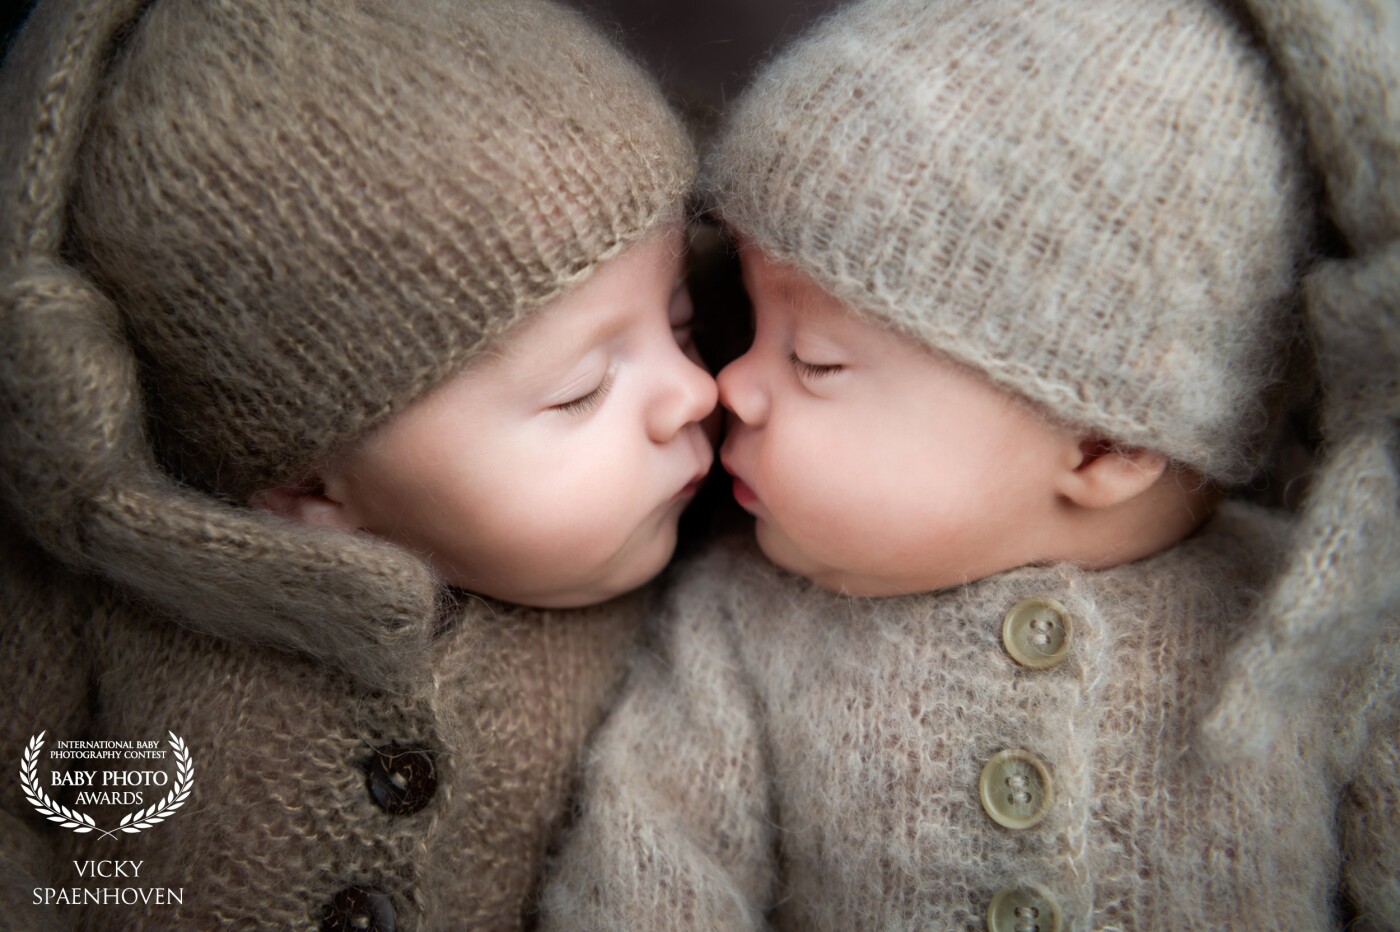 These lovely twin boys stole my heart. They were so beautiful together and had such a sweet connection. I wanted to create some really tender close-ups. Aren't they cute together?